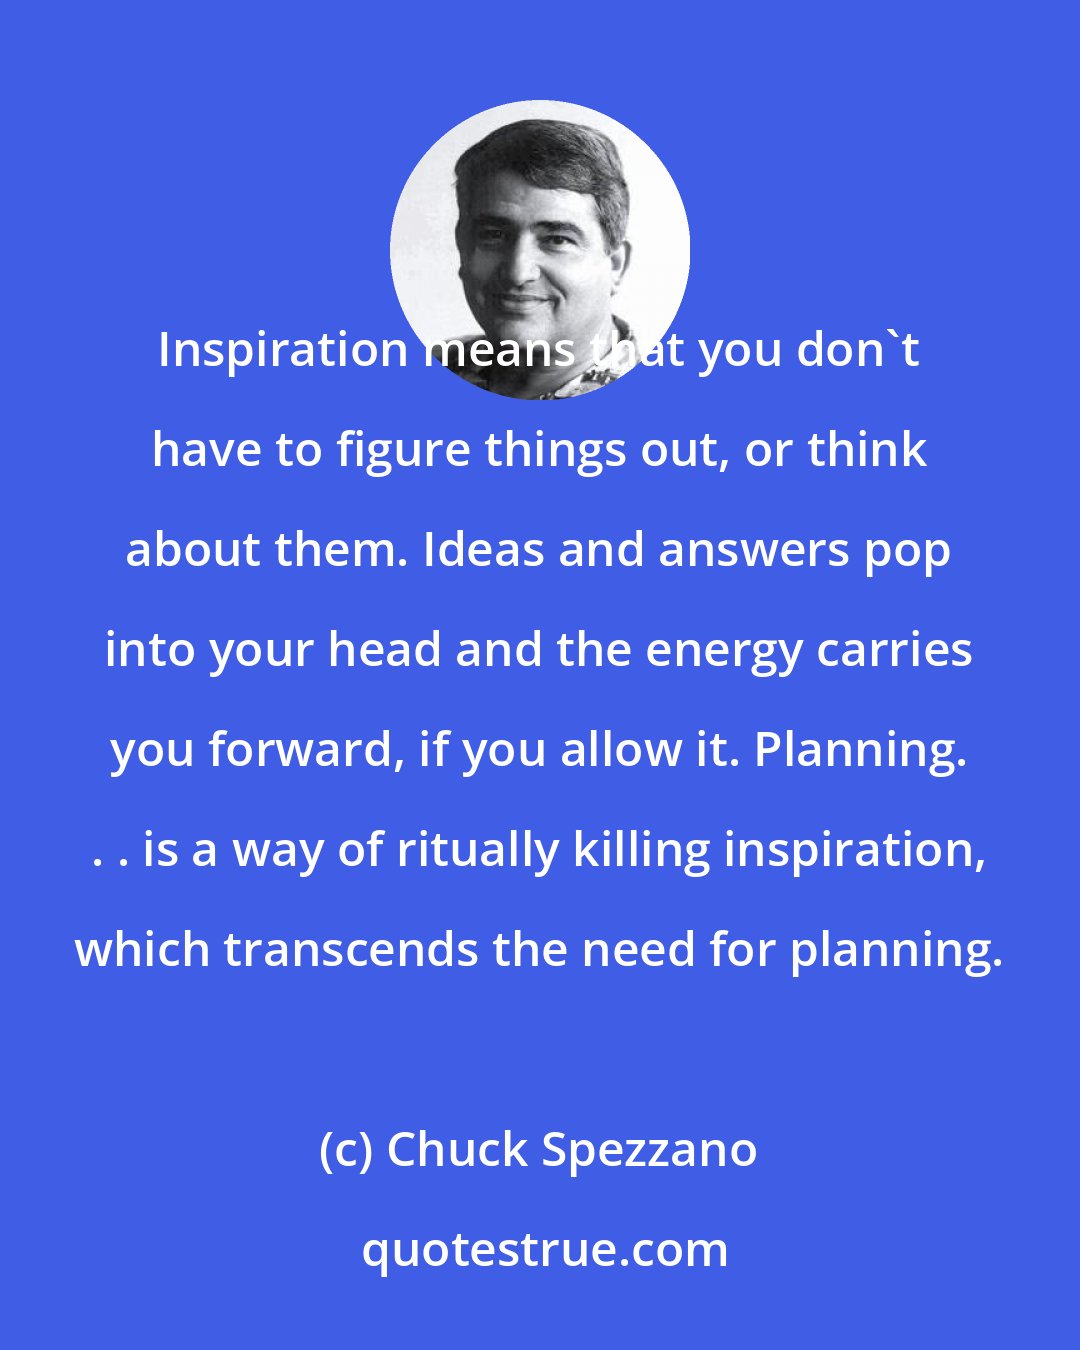 Chuck Spezzano: Inspiration means that you don't have to figure things out, or think about them. Ideas and answers pop into your head and the energy carries you forward, if you allow it. Planning. . . is a way of ritually killing inspiration, which transcends the need for planning.